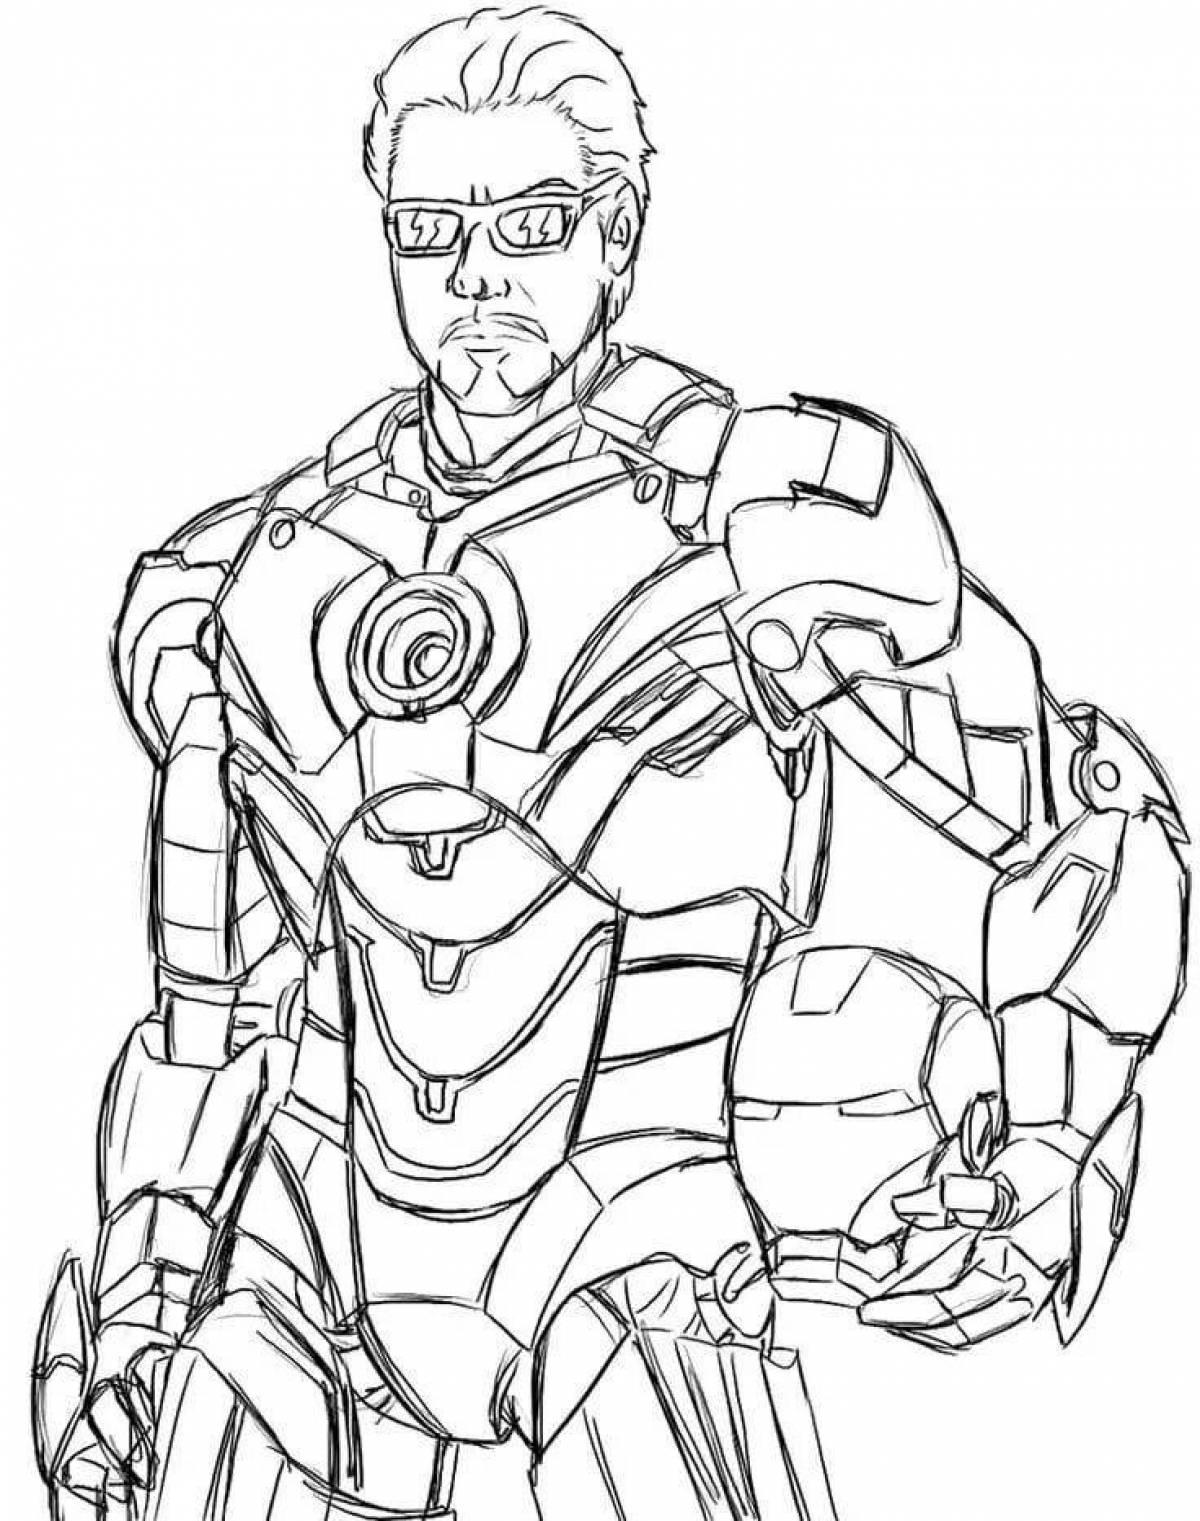 Vogue tony stark coloring page